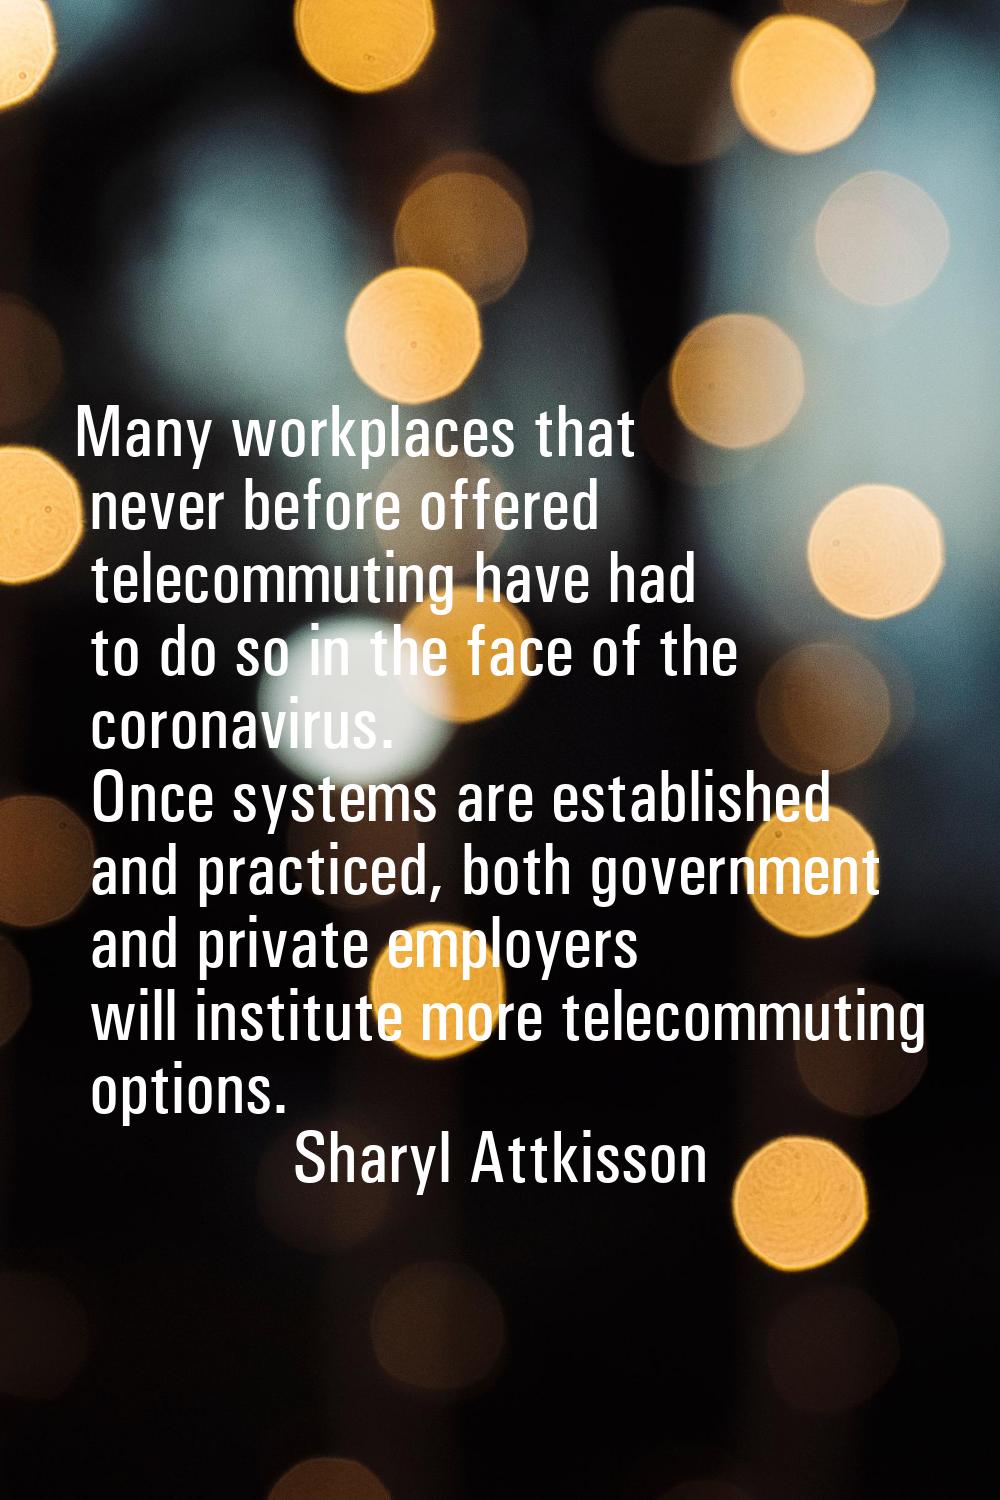 Many workplaces that never before offered telecommuting have had to do so in the face of the corona